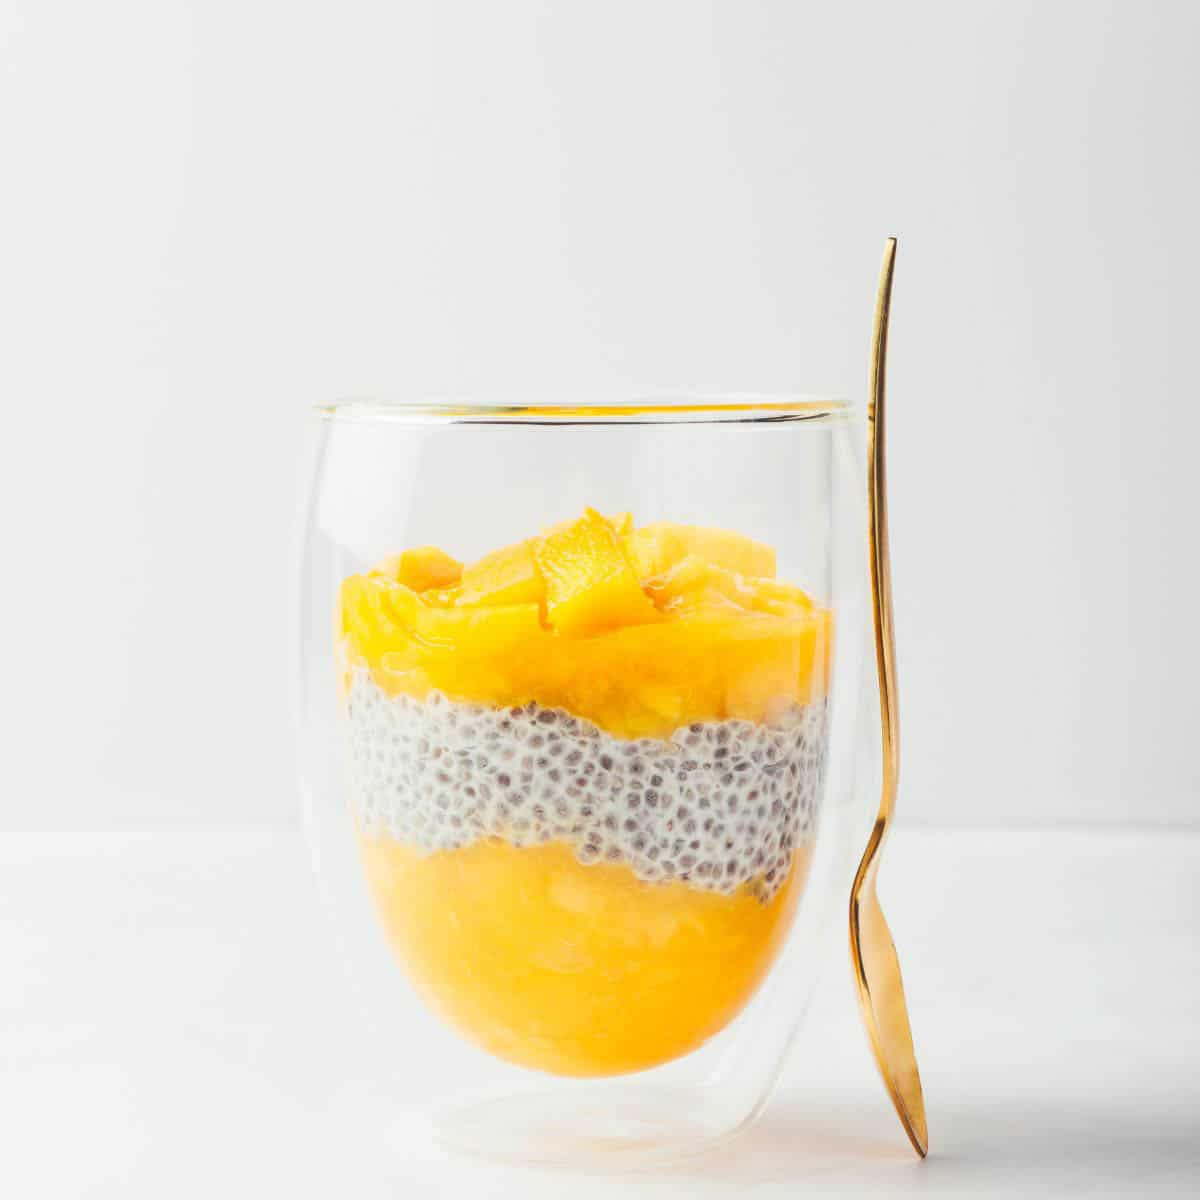 Mango and Chia Seed layered Breakfast Pudding in a clear glass